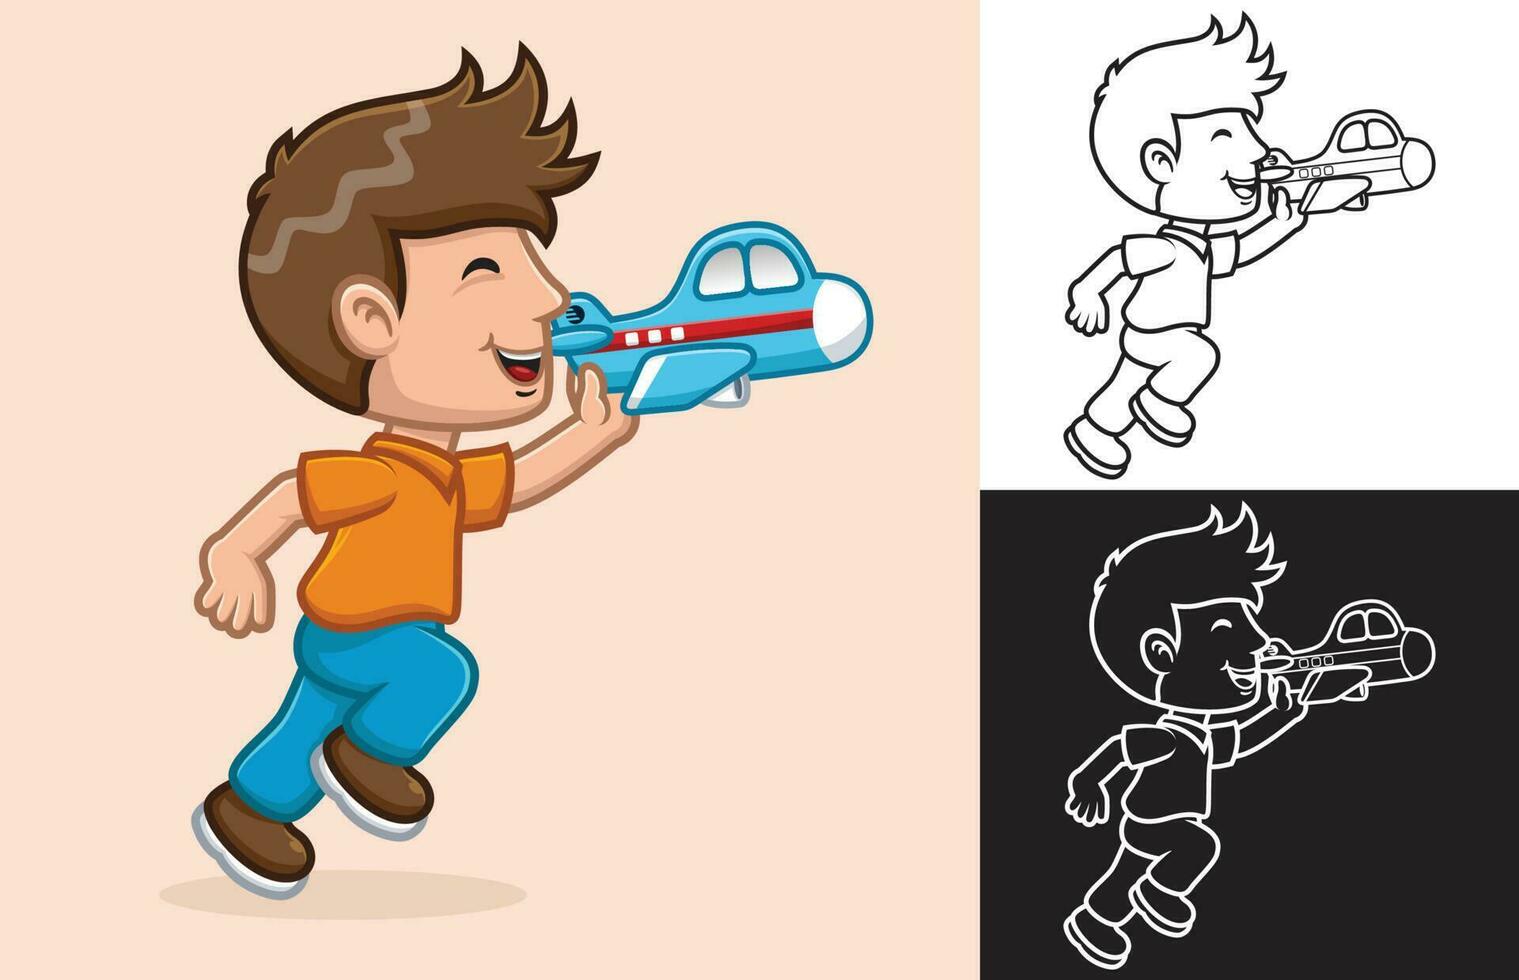 Vector illustration of cartoon boy running while holding airplane toy